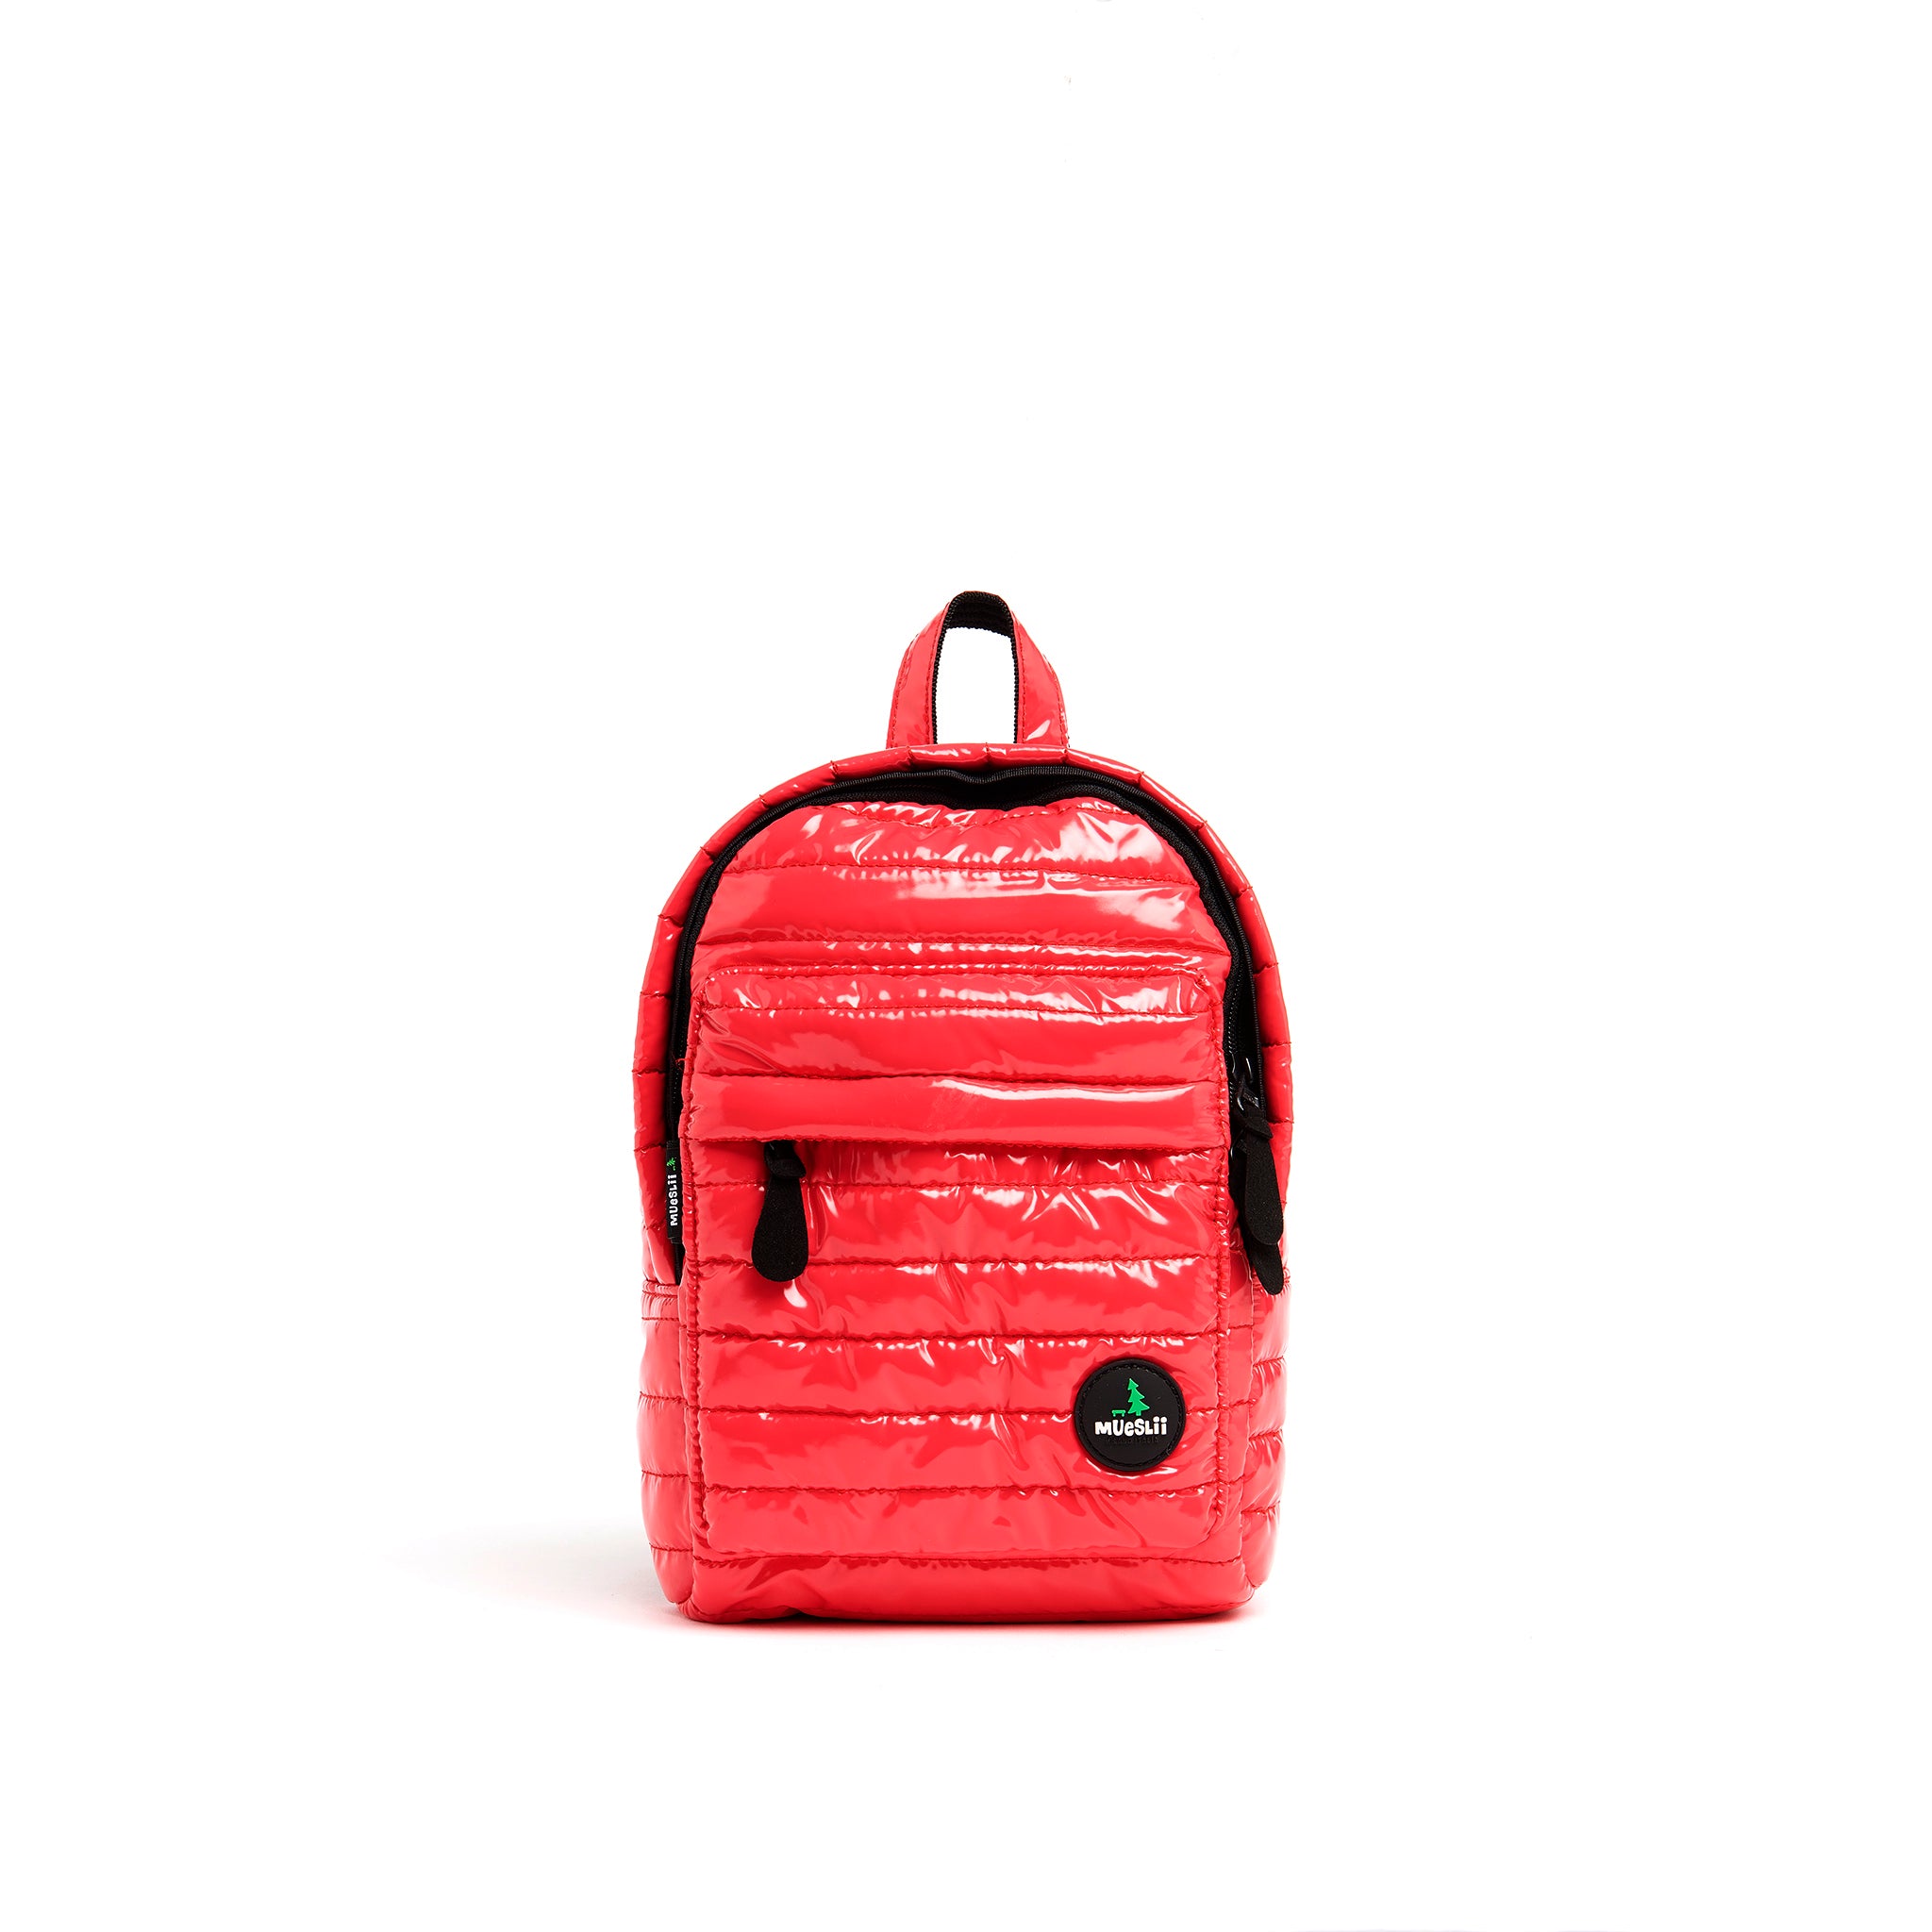 Mueslii original puffer Mini pack made of high density nylon and Ykk zips, color metal red, front view.